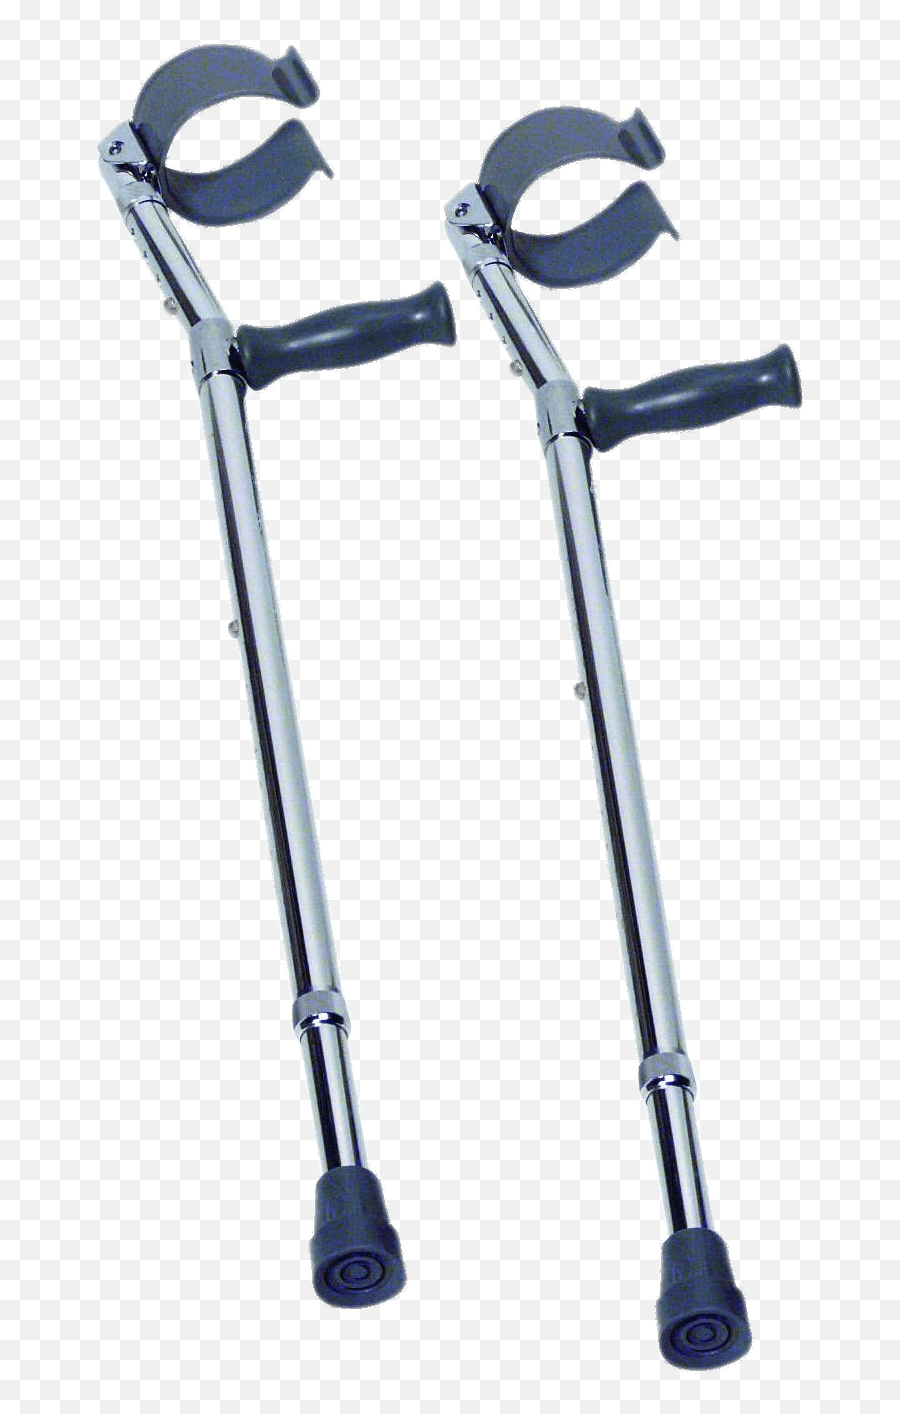 Pair Of Crutches - Elbow Crutches Clipart Full Size Emoji,Elbow Clipart